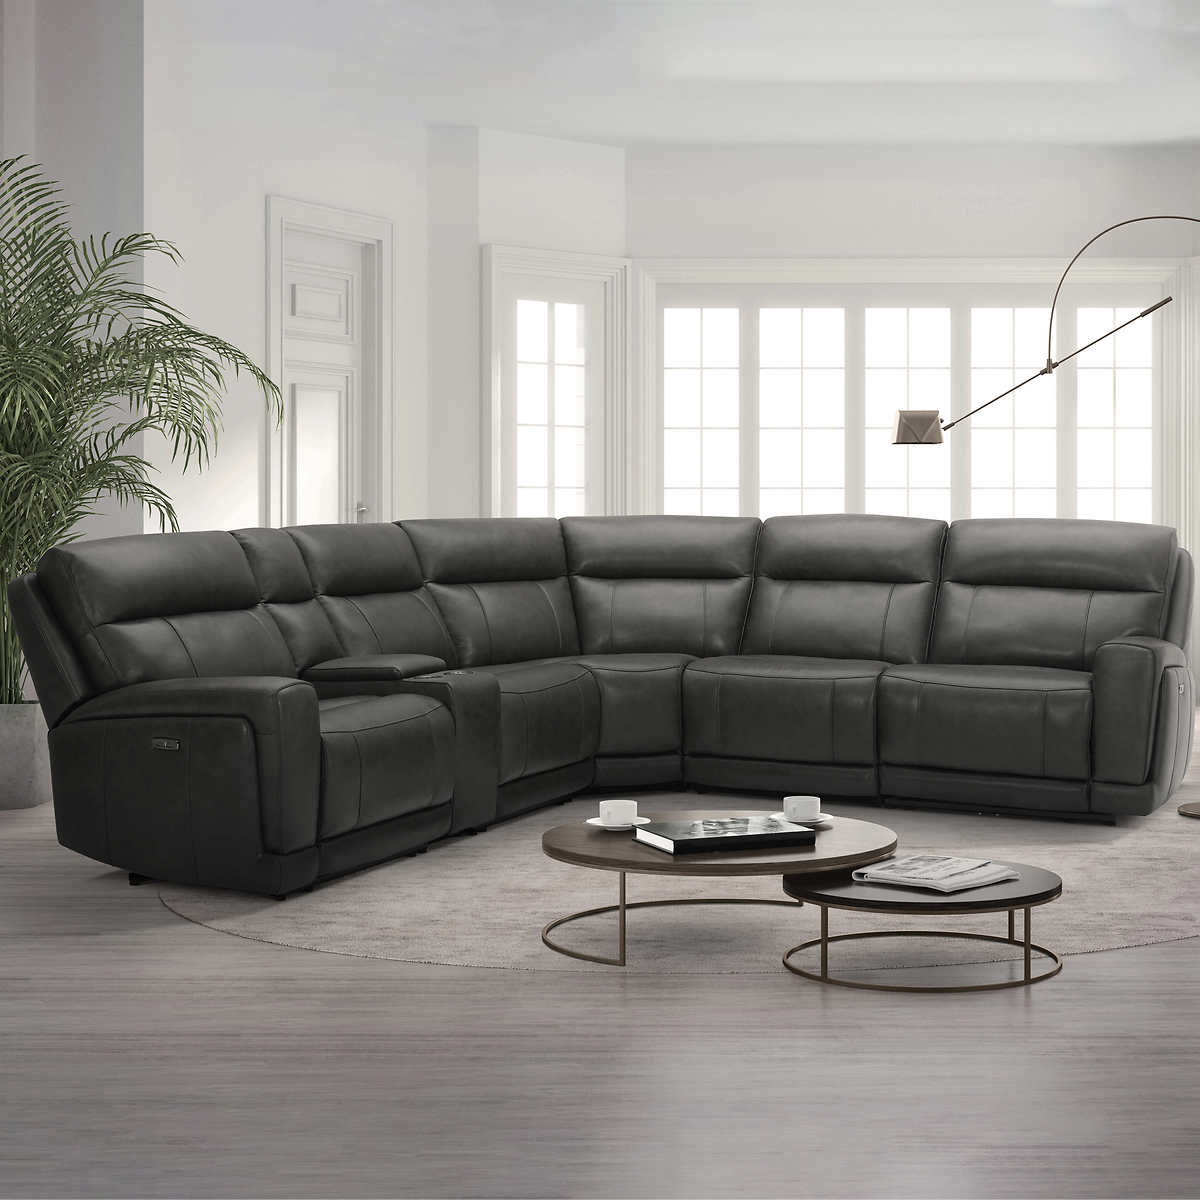 Leather Power Reclining Sectional, Danvors 7 Pc Leather Sectional Sofa